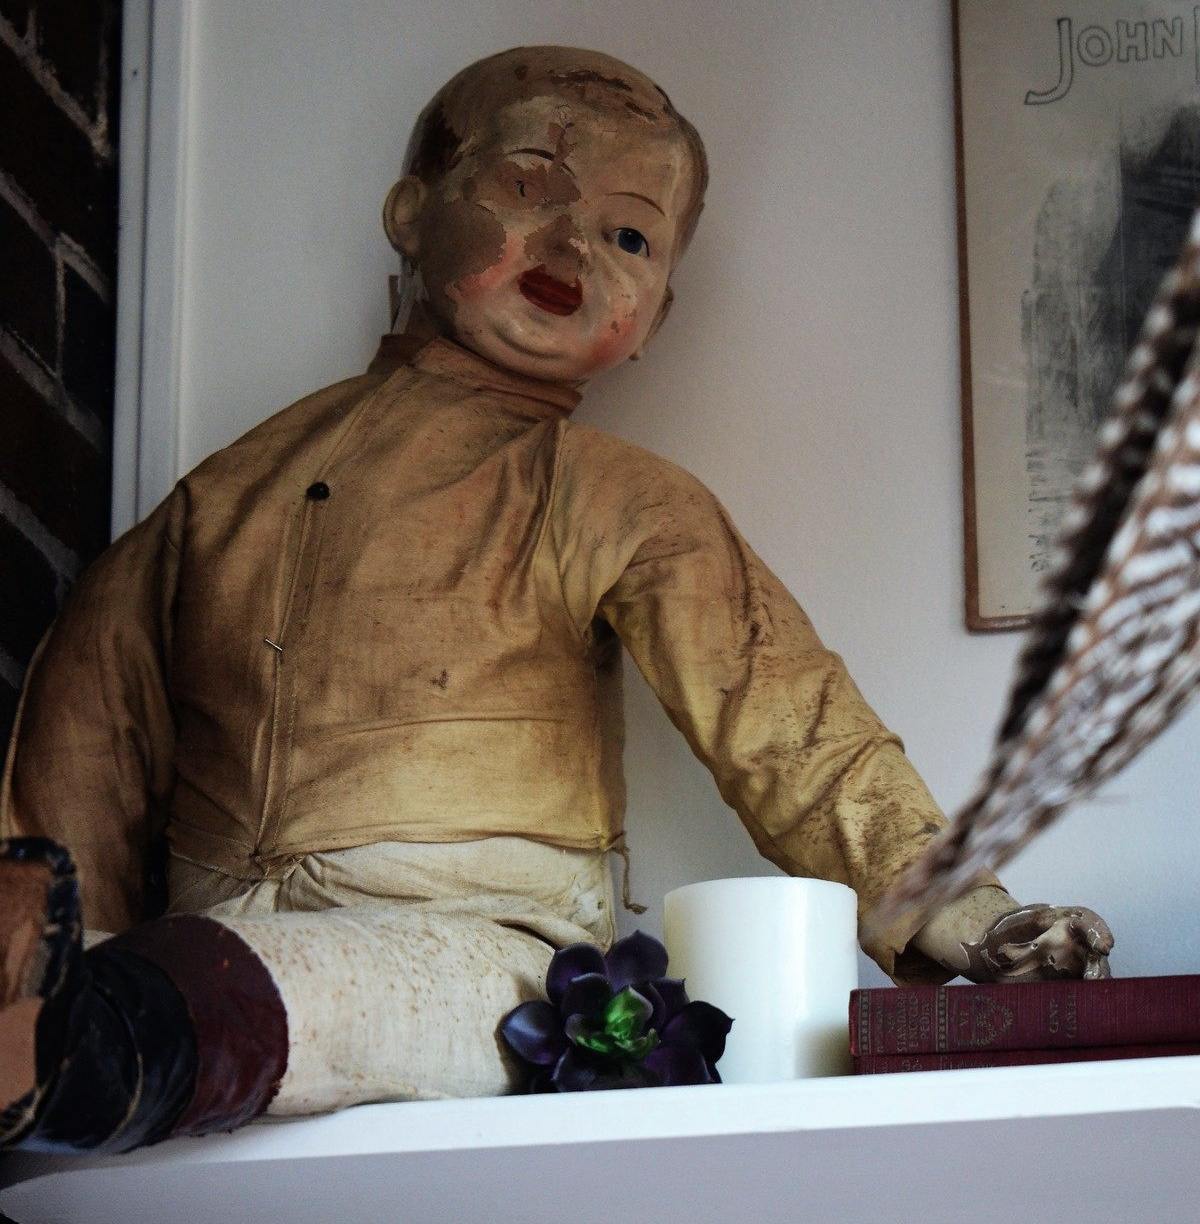 Charley - The Haunted Doll